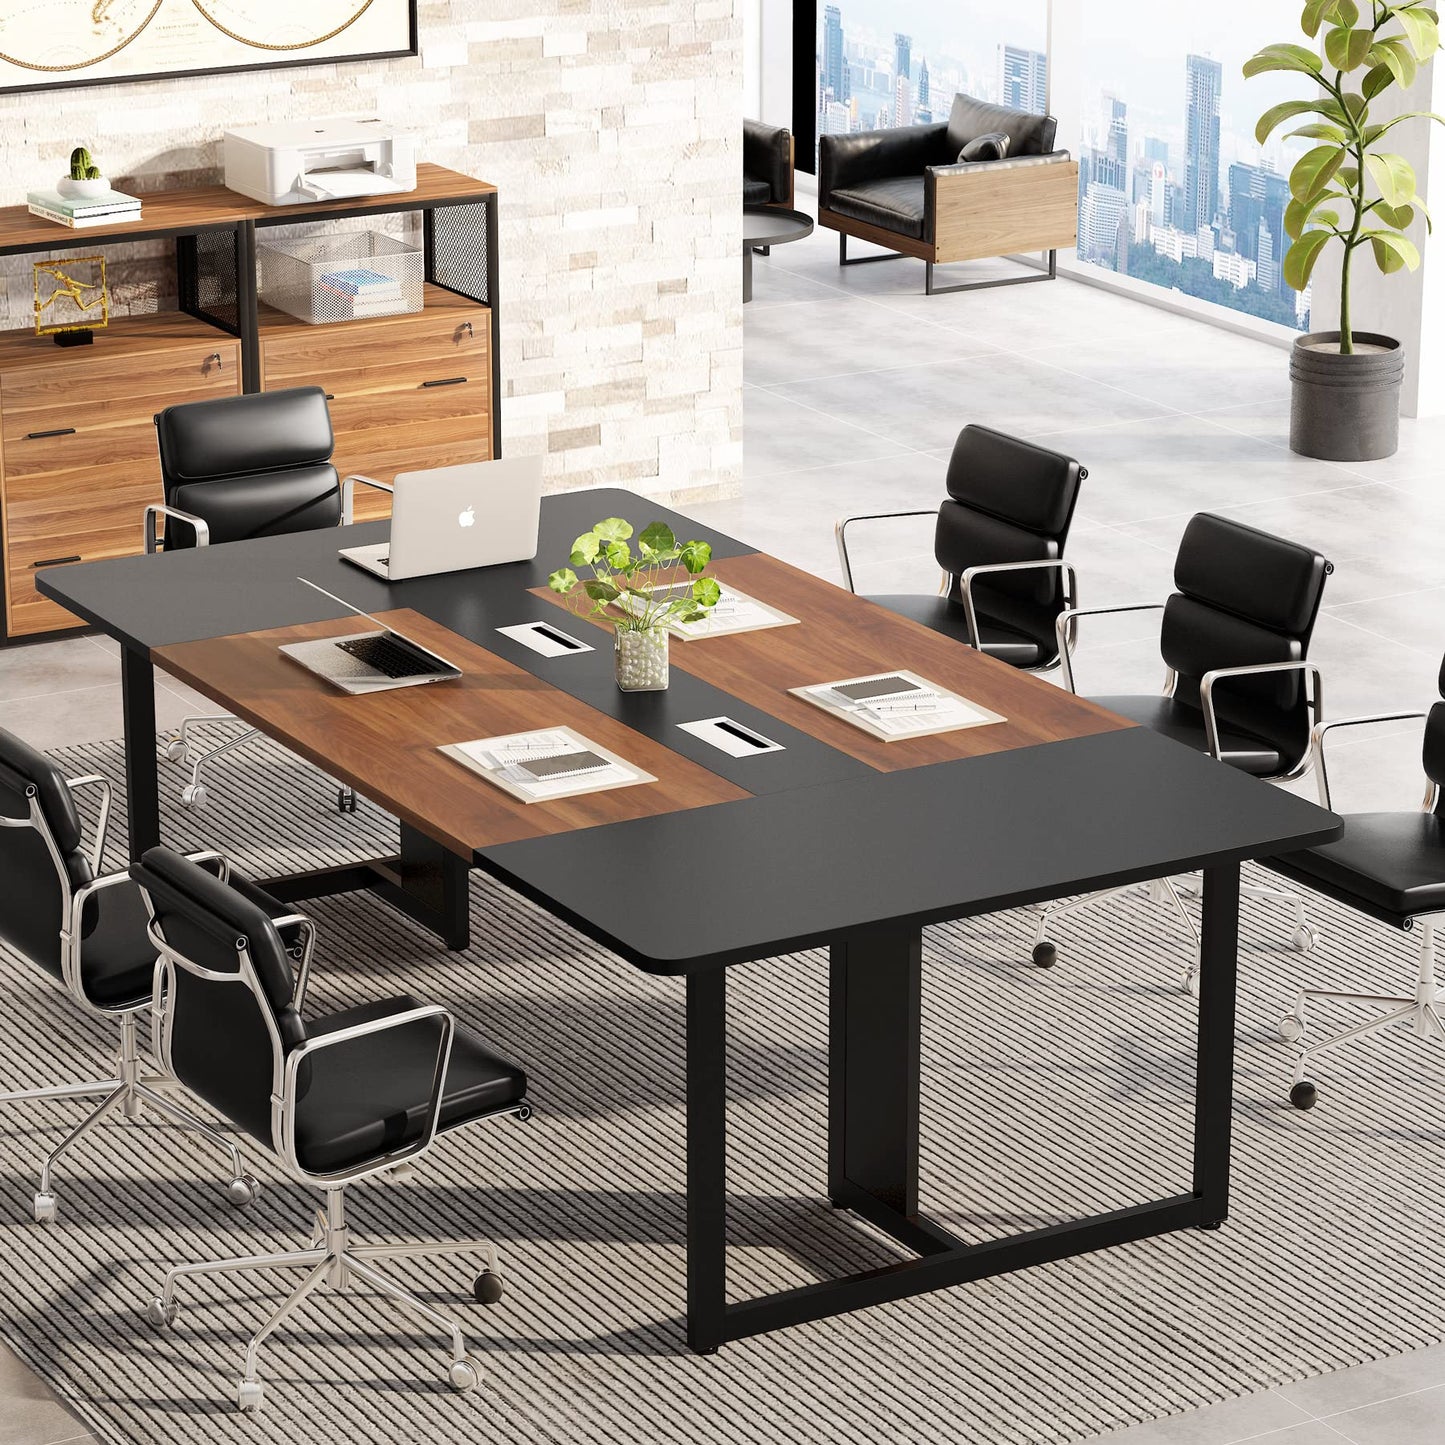 Tribesigns 70.86'' Executive Desk, Large Office Computer Desk with Strong Metal Frame, Wooden Workstation Business Furniture, 8 People Rectangle Conference Table for Home Office,XK00251